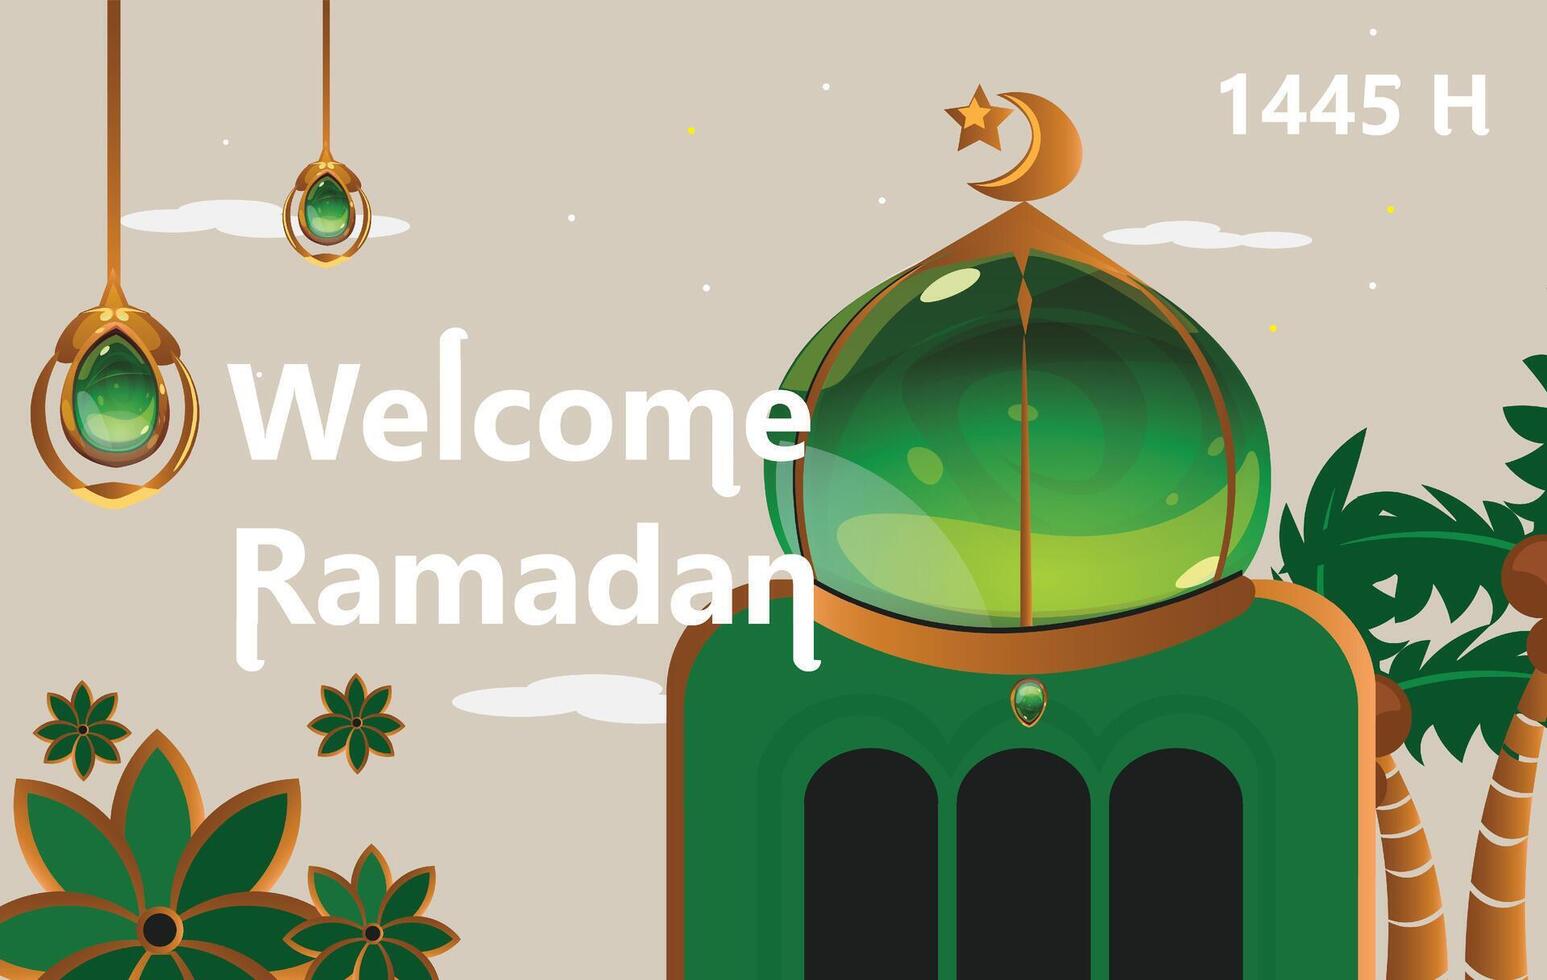 welcome ramadan 1445 hijriyah moeslim background with mosque, light and trees for gift card or wallpaper vector